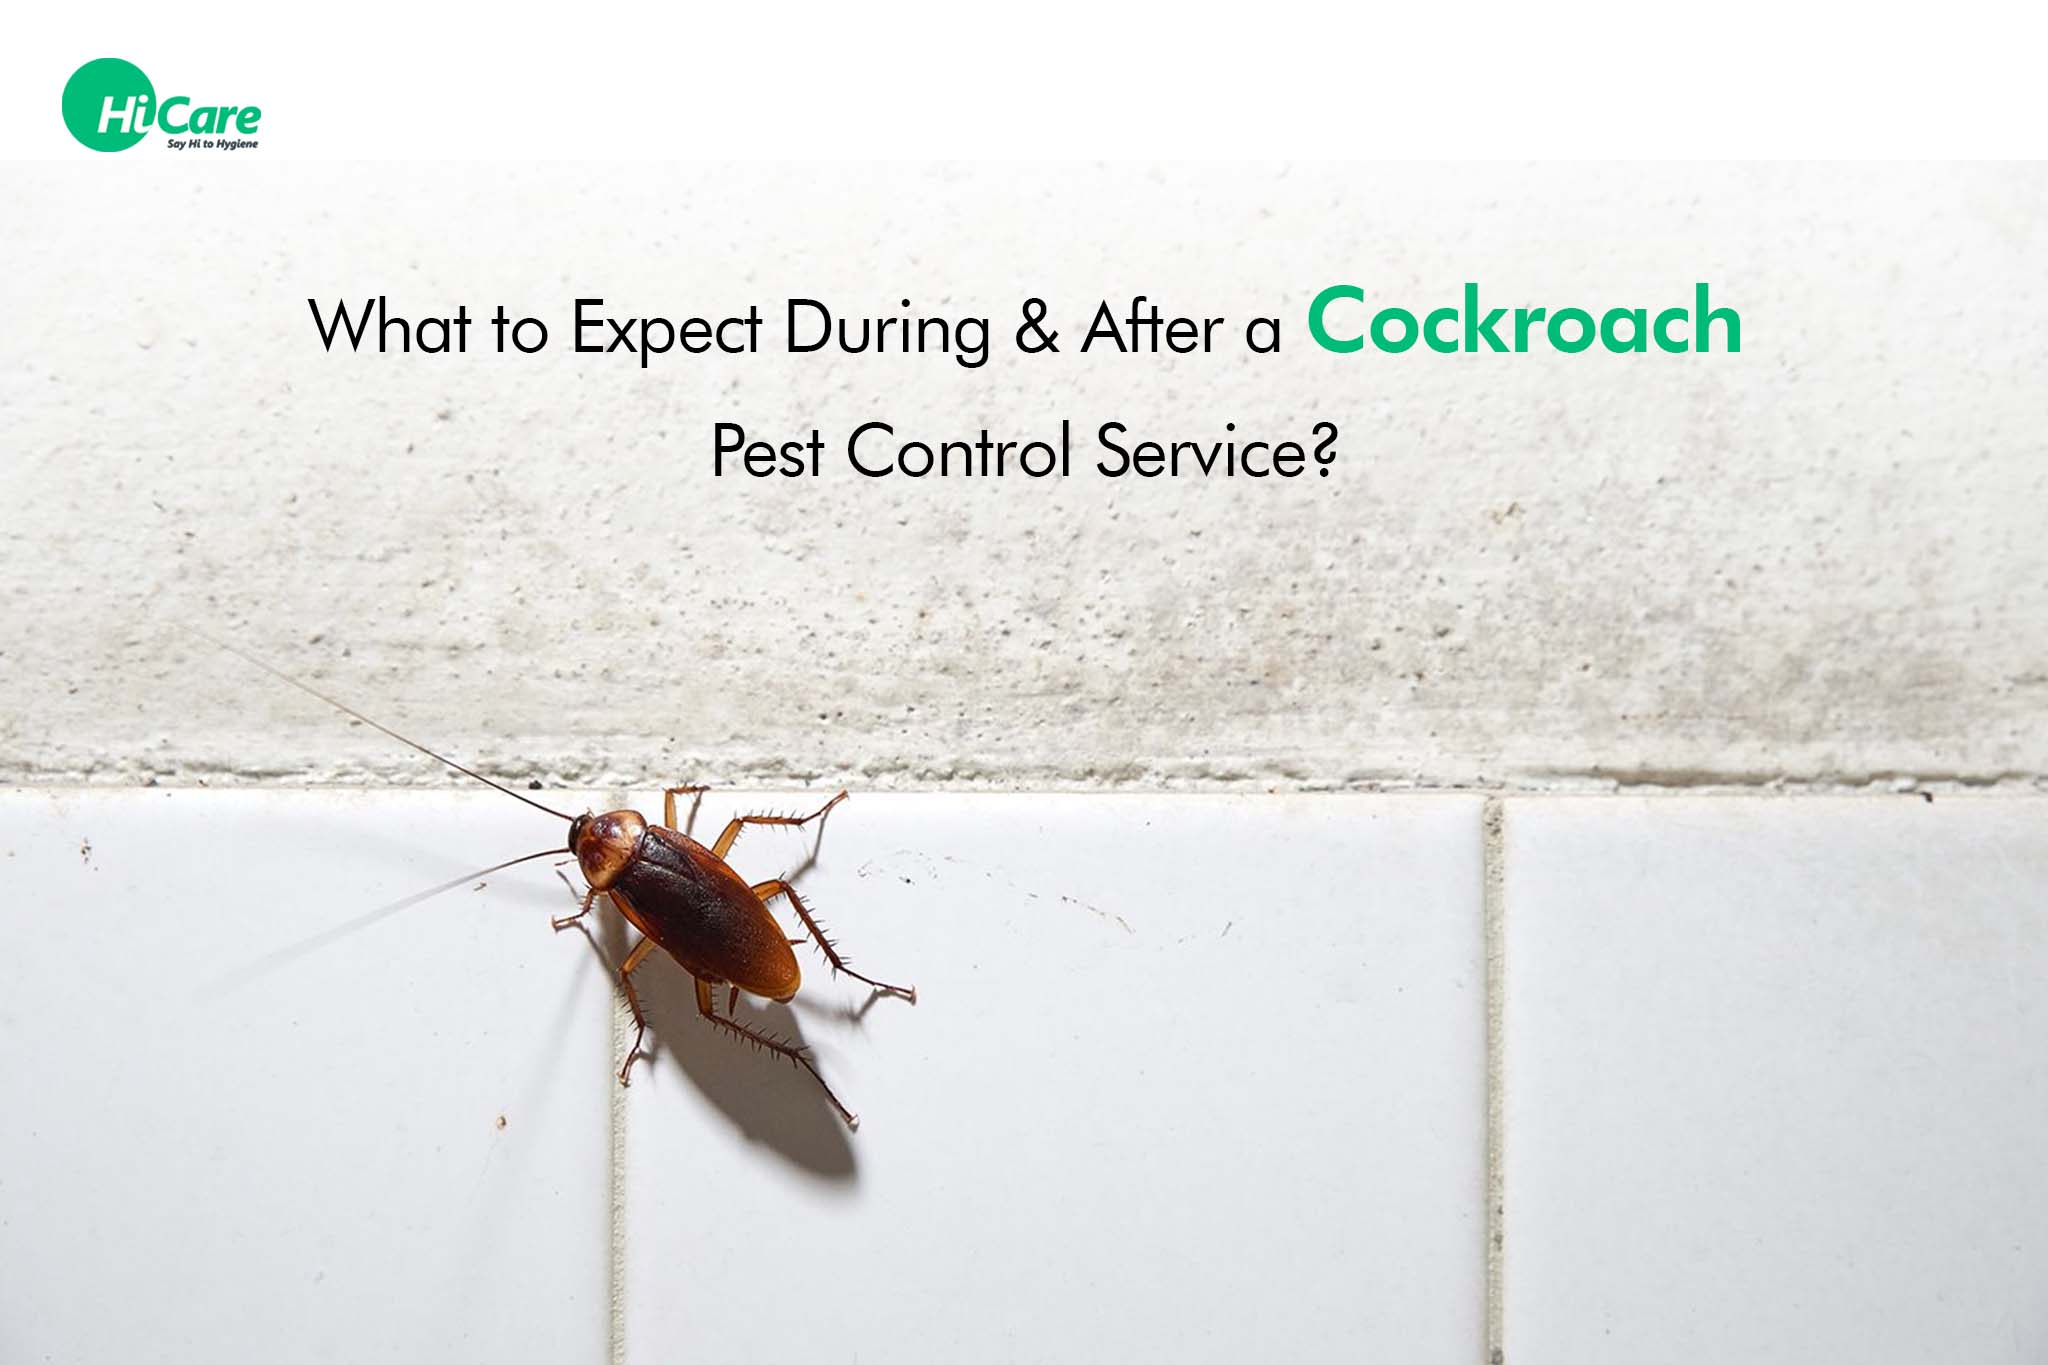 What to Expect During and After a Cockroach Pest Control Service